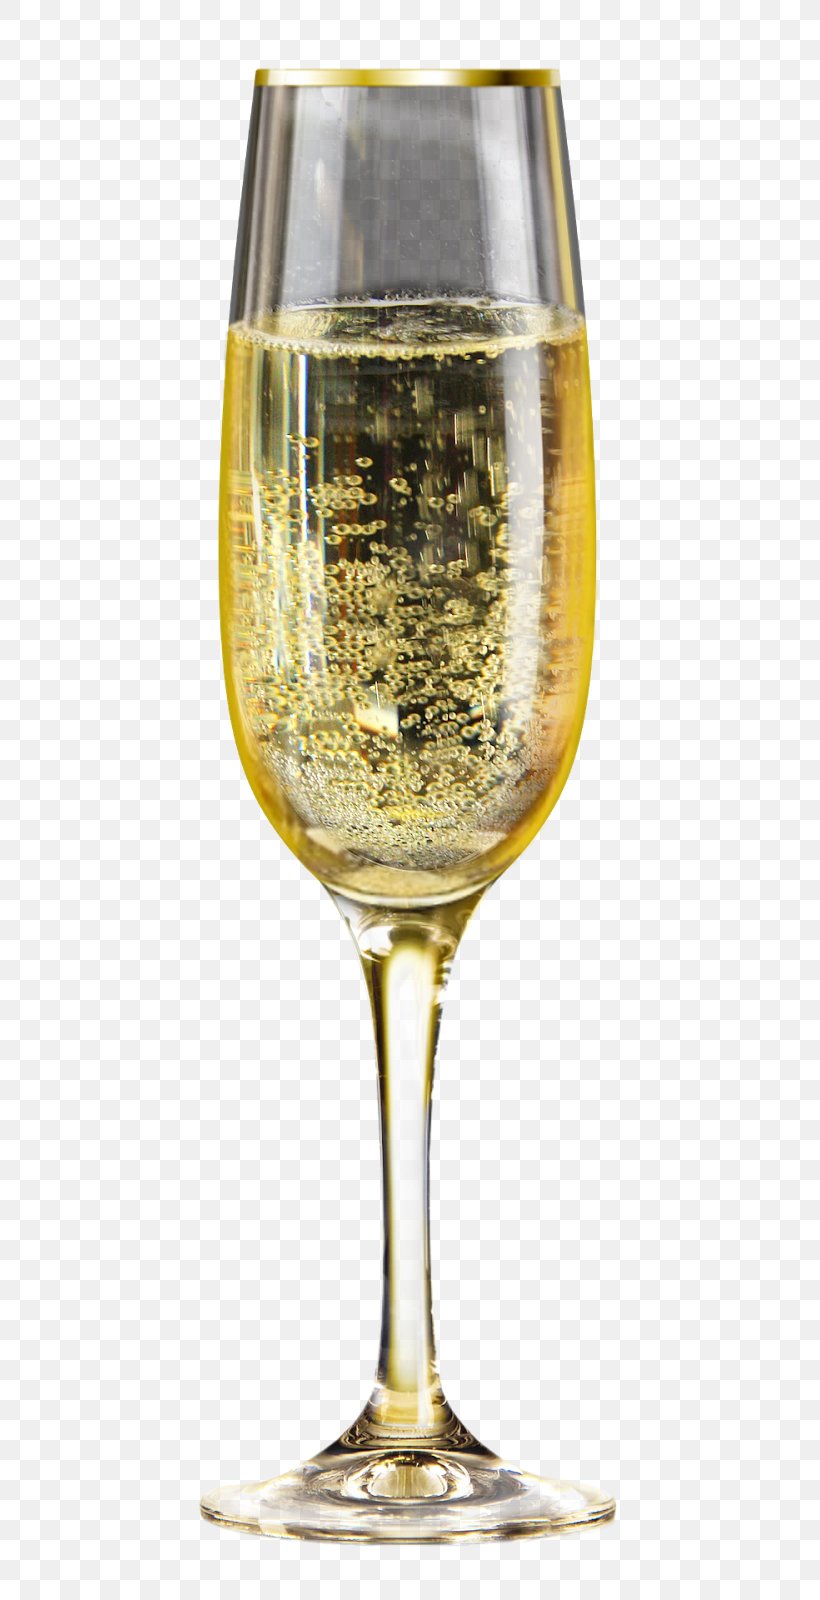 Champagne Glass Sparkling Wine Champagne Cocktail, PNG, 593x1600px, Champagne, Beer Glass, Brunch, Champagne Breakfast, Champagne Cocktail Download Free